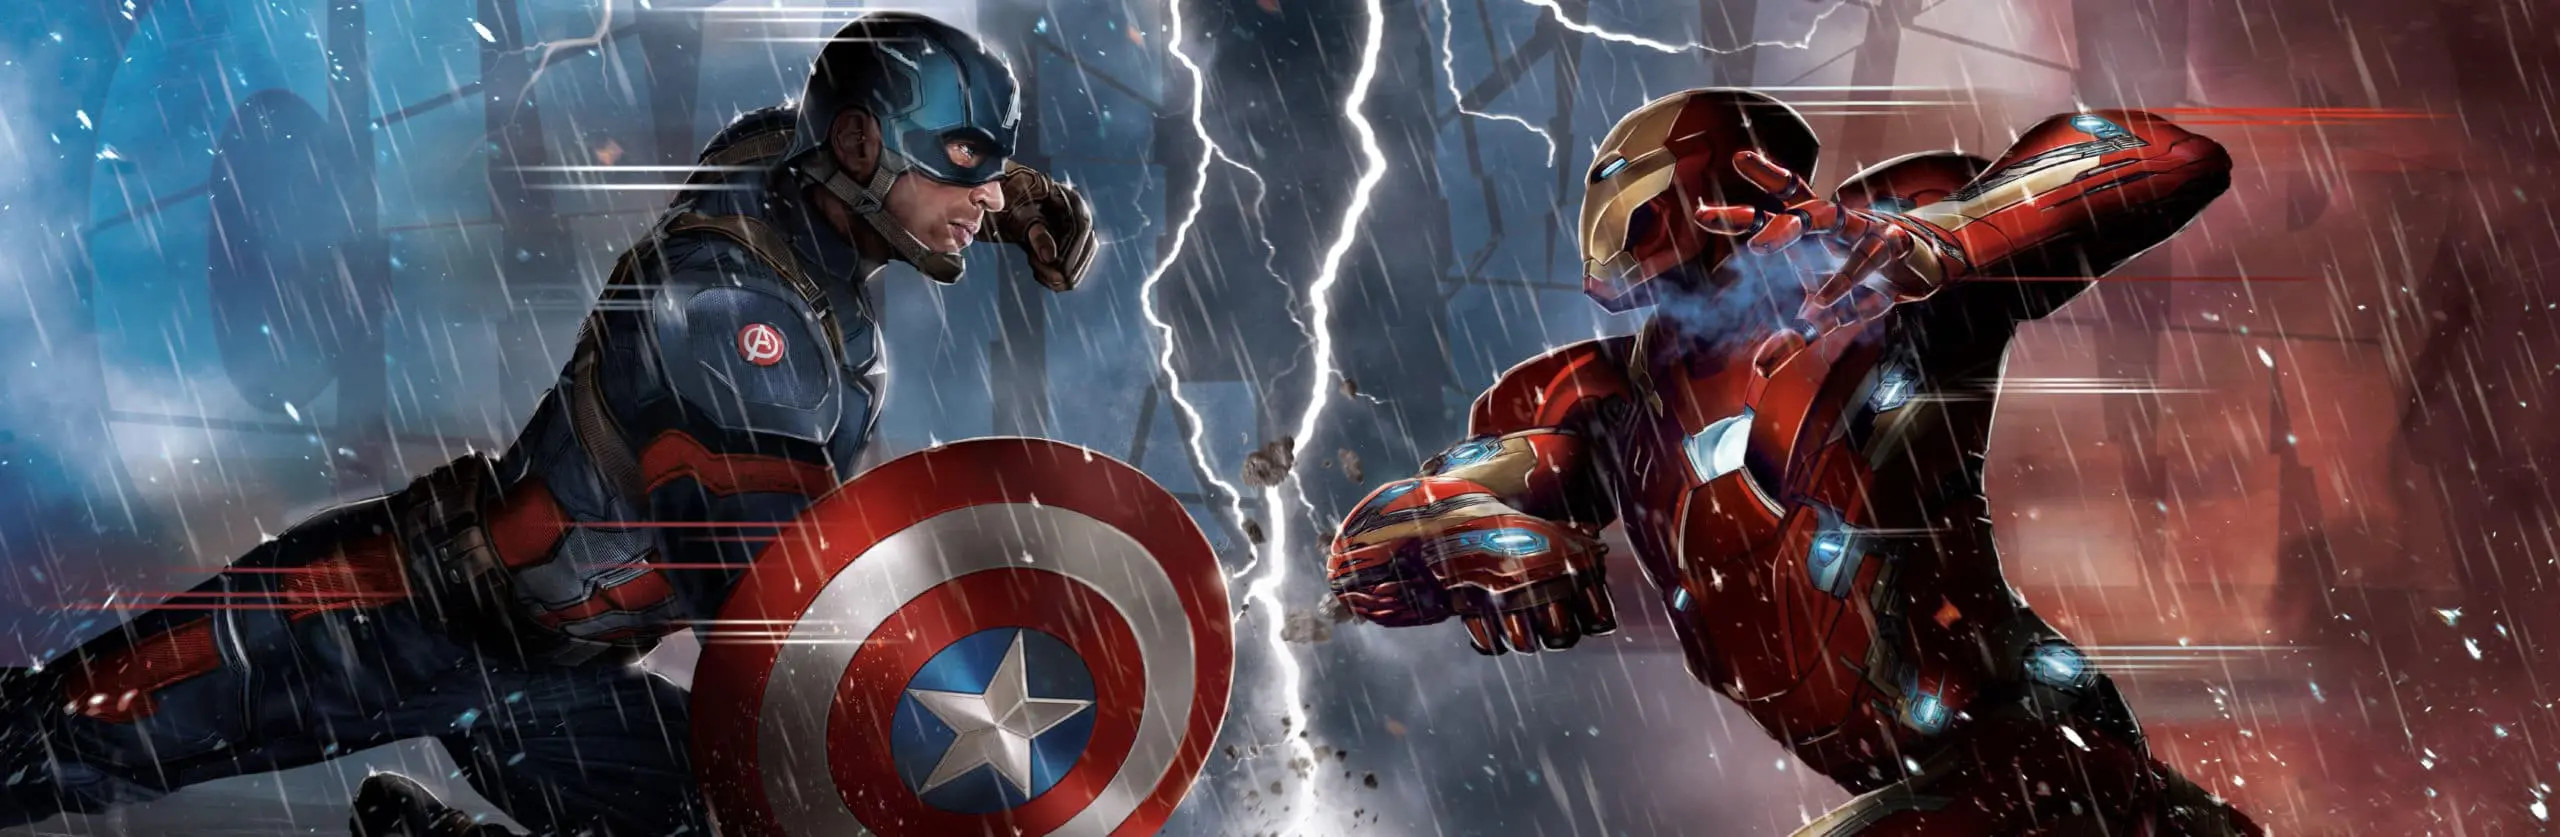 CAPTAIN AMERICA: CIVIL WAR RELEASES IN THEATERS WITH 3D ART FROM VIRTUOS